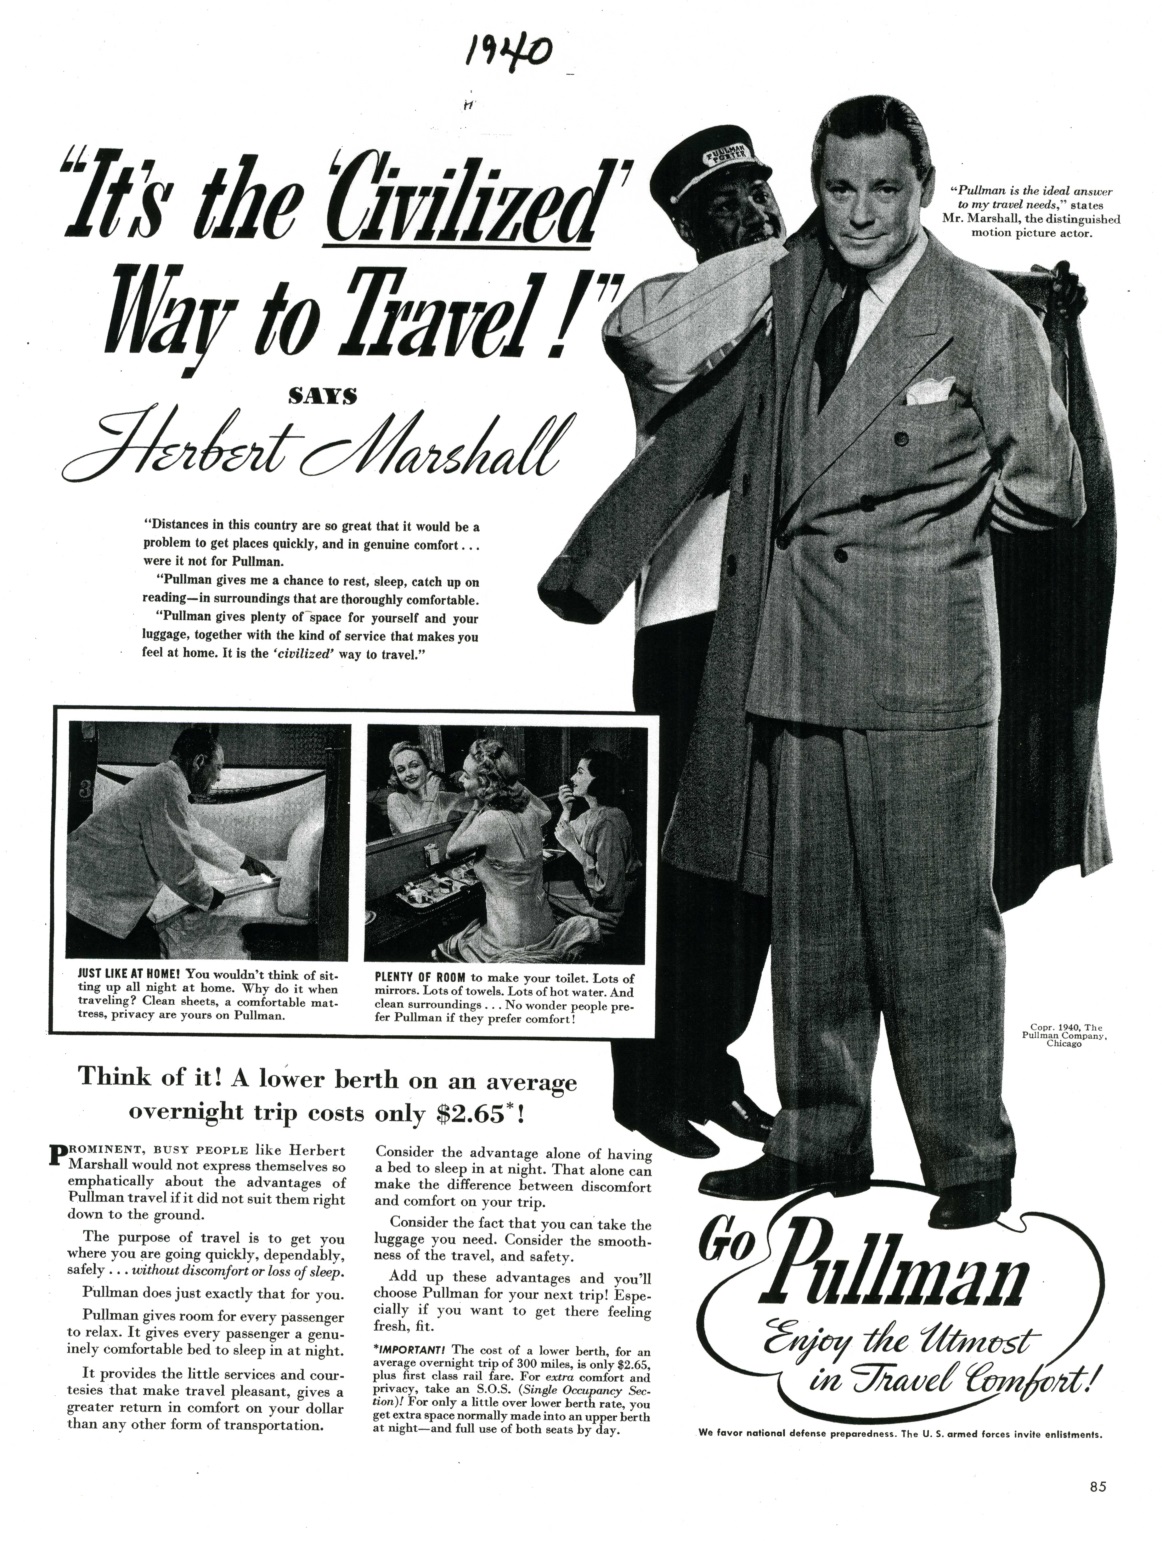 m:\jay photos\scanned images\race ads\ad-1940civilized178.jpg